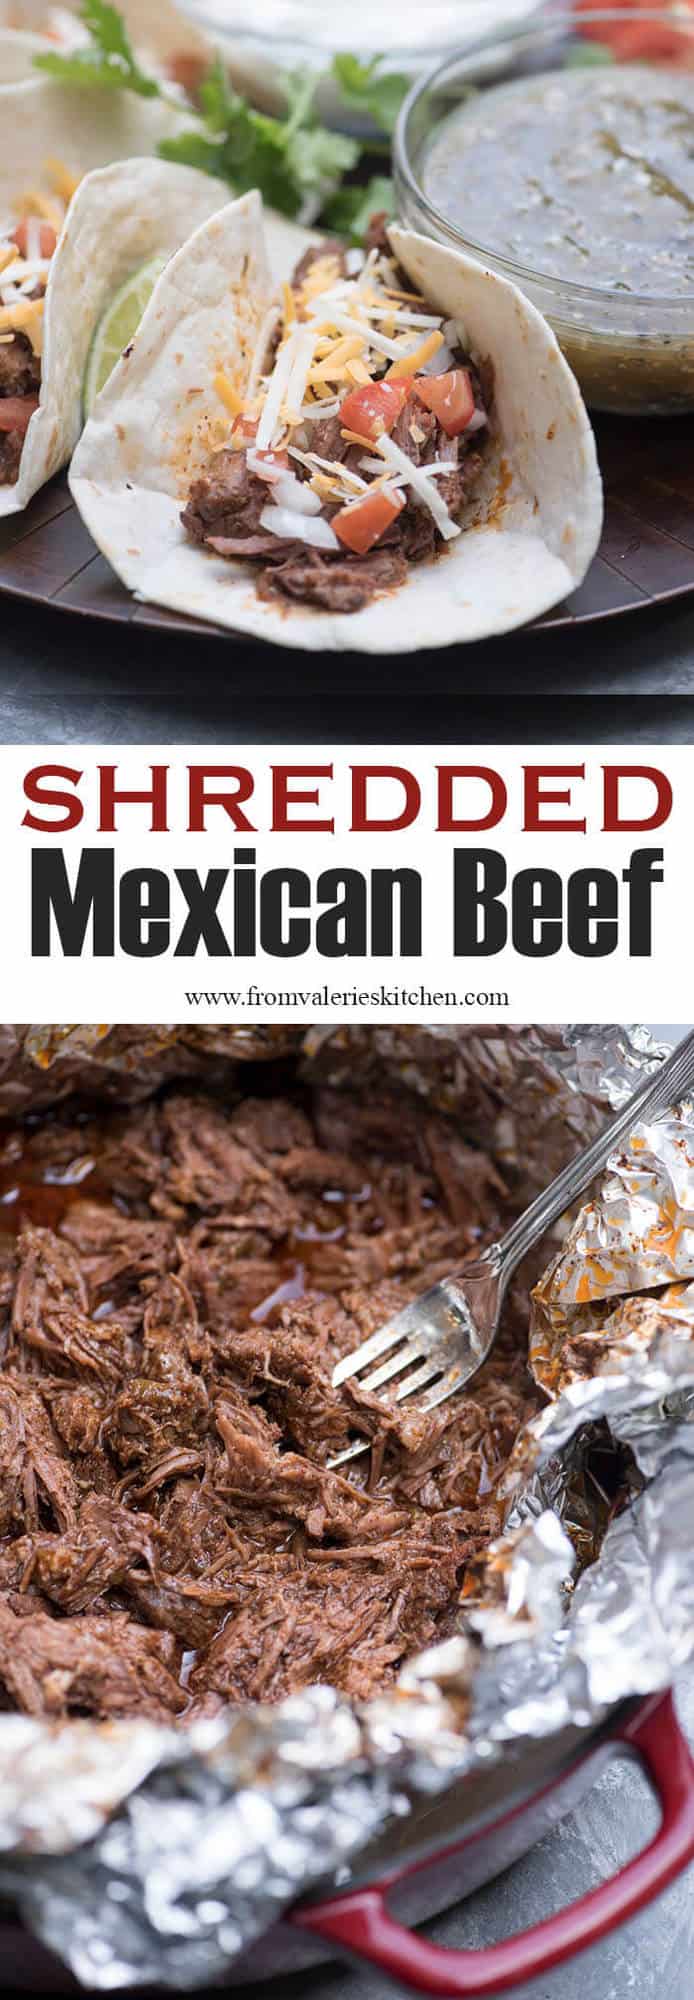 Shredded Mexican Beef (Oven or Slow Cooker) | Valerie's Kitchen